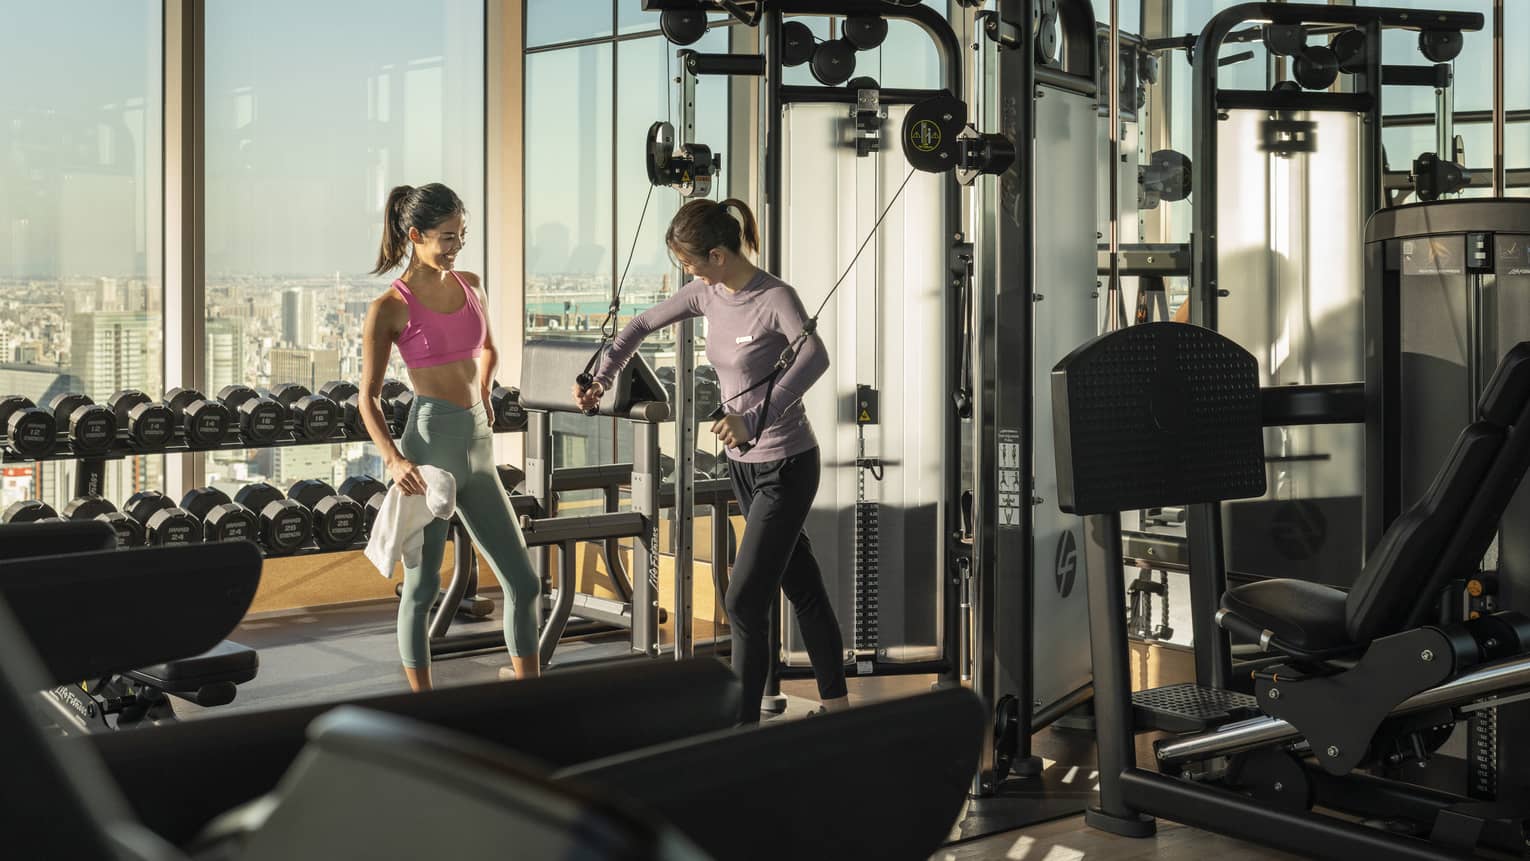 Trainer shows woman how to use exercise machine during a private session